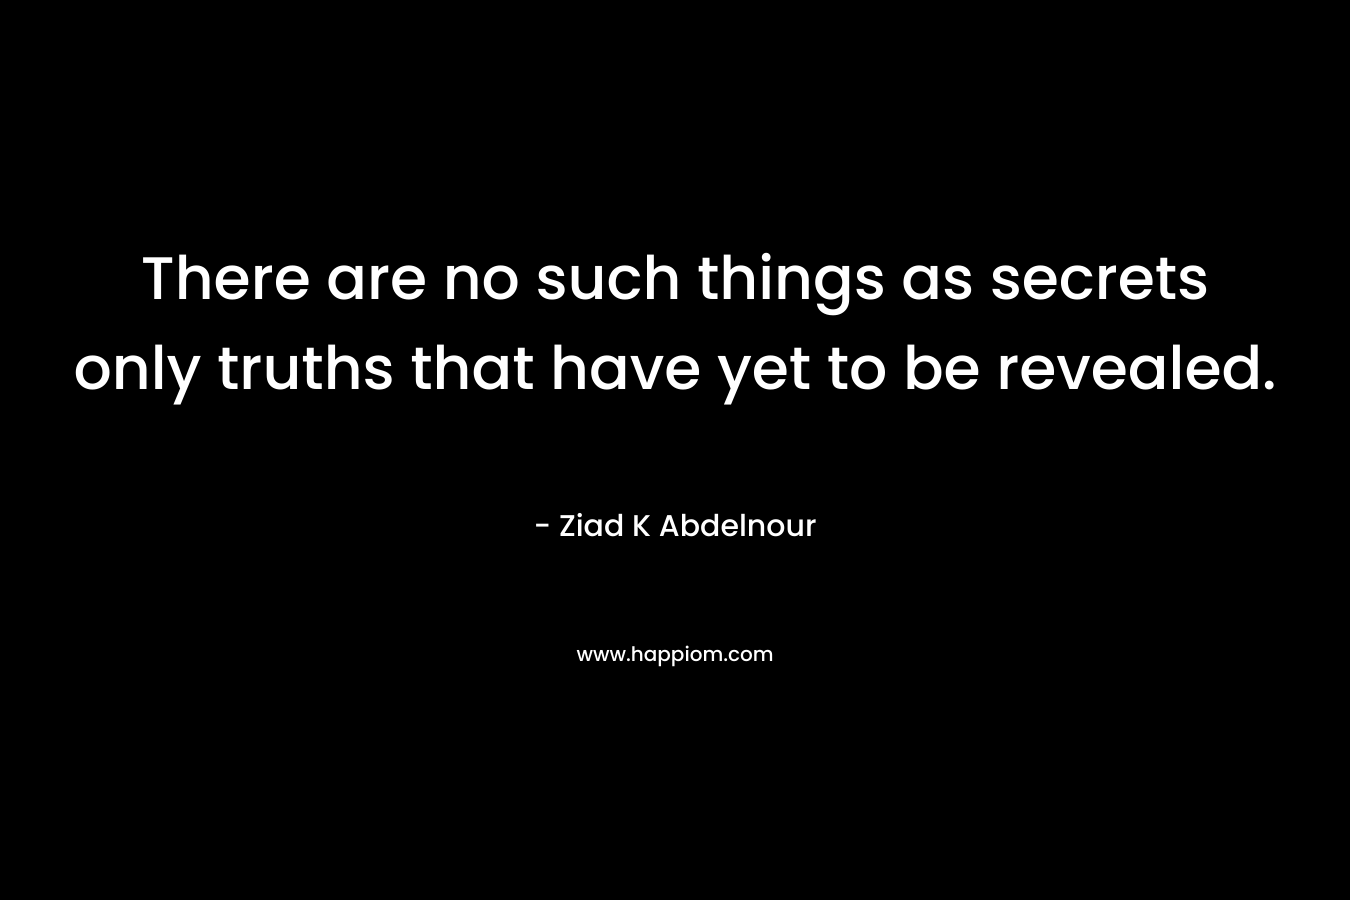 There are no such things as secrets only truths that have yet to be revealed.